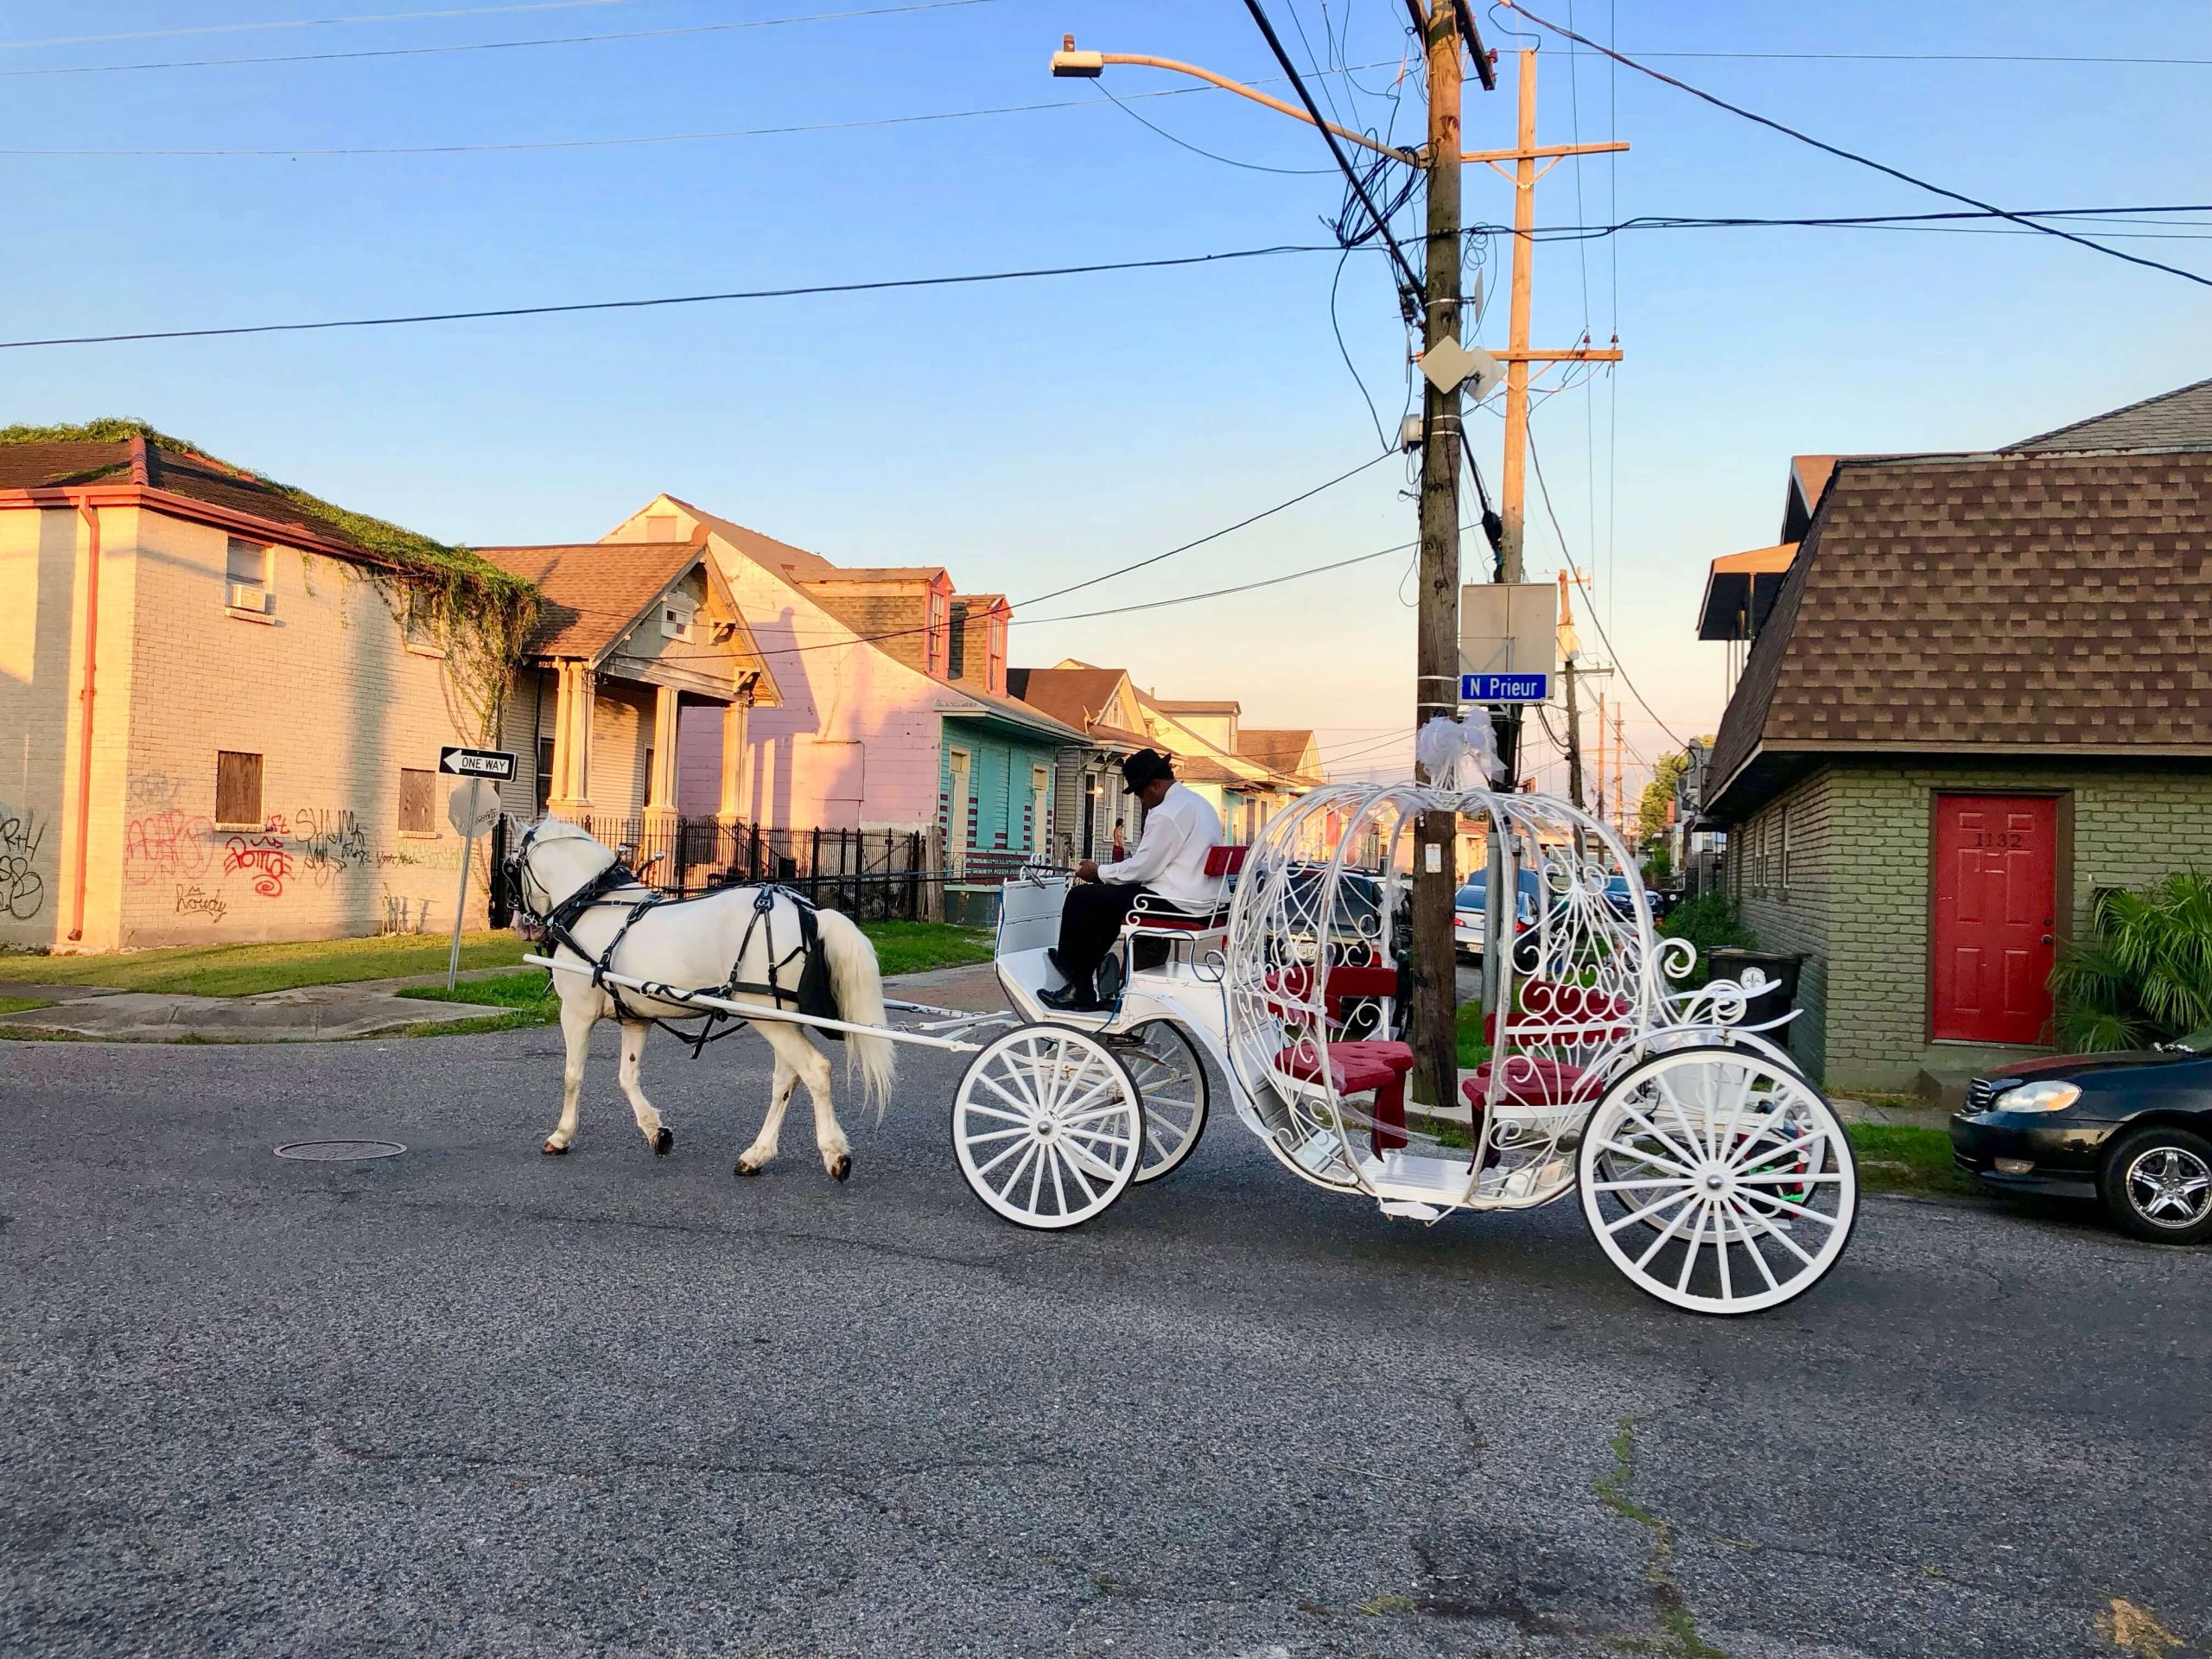 Cinderella's Carriage in New Orleans